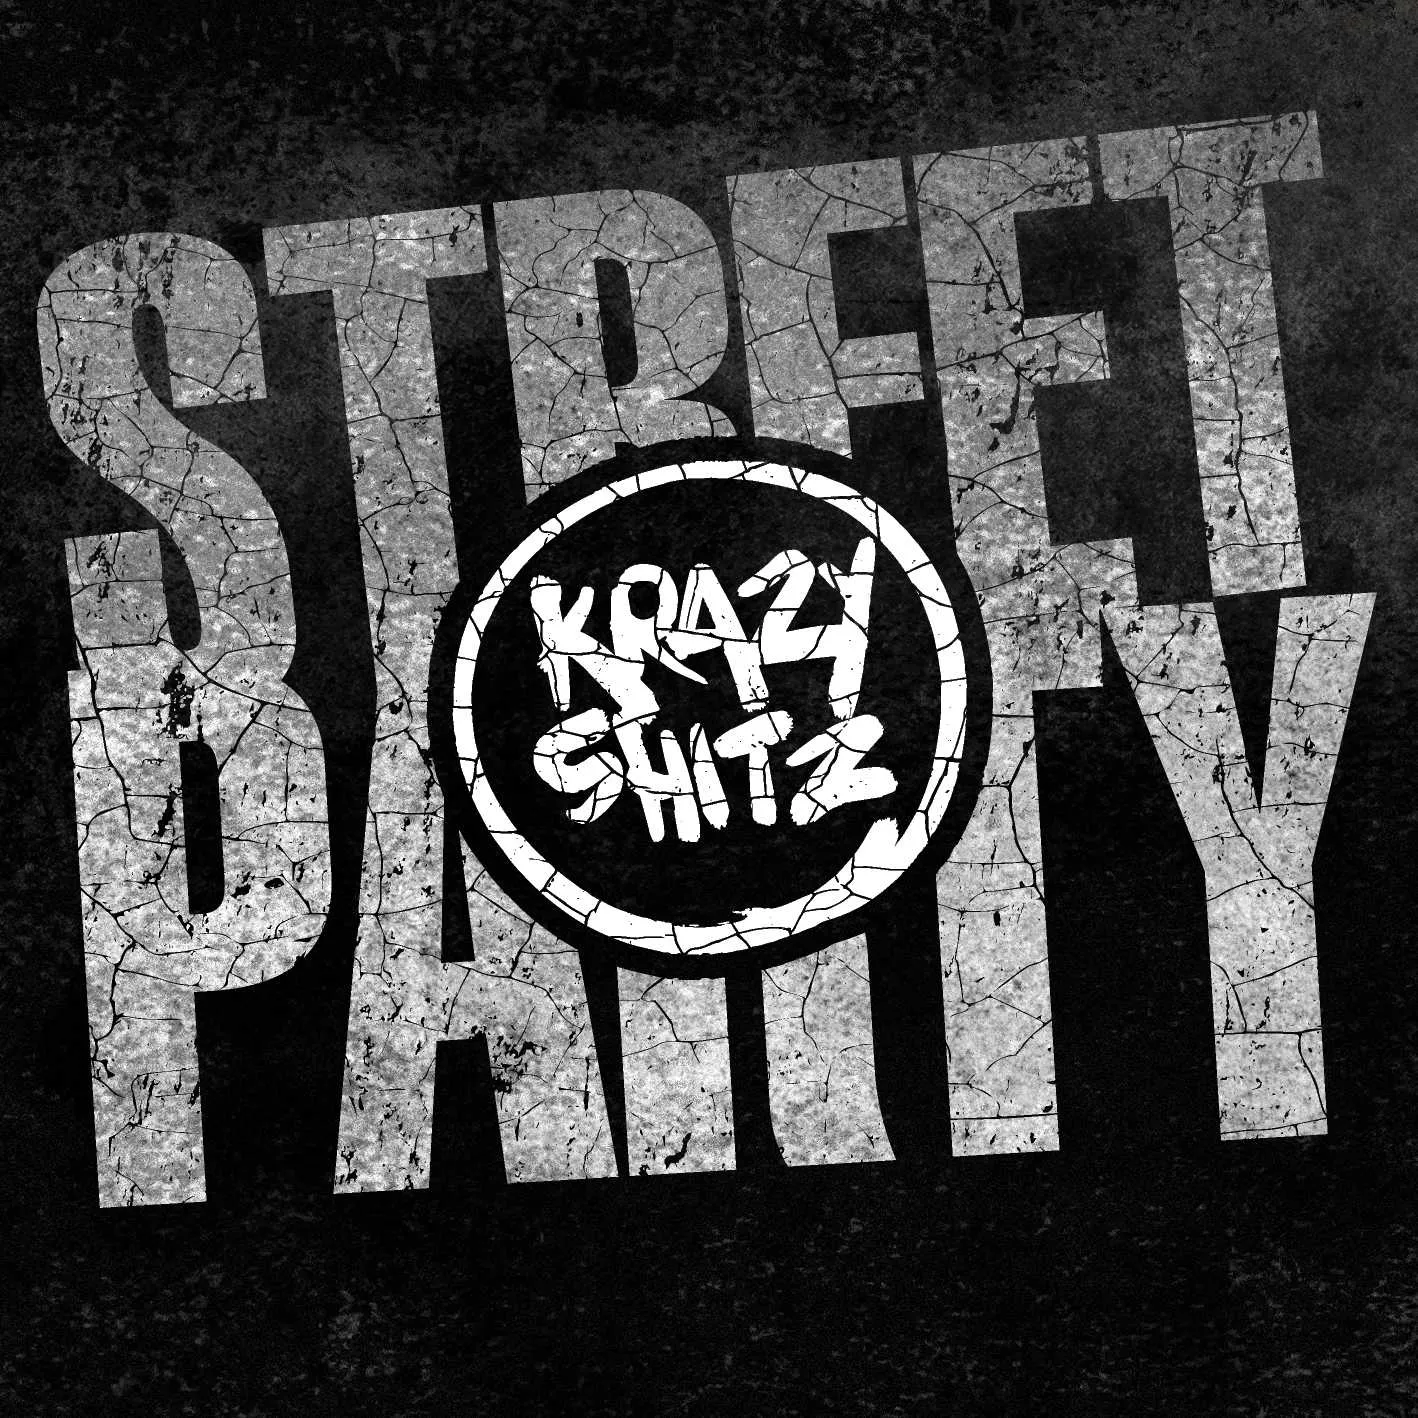 Album cover for “Street Party” by Krazy Shitz